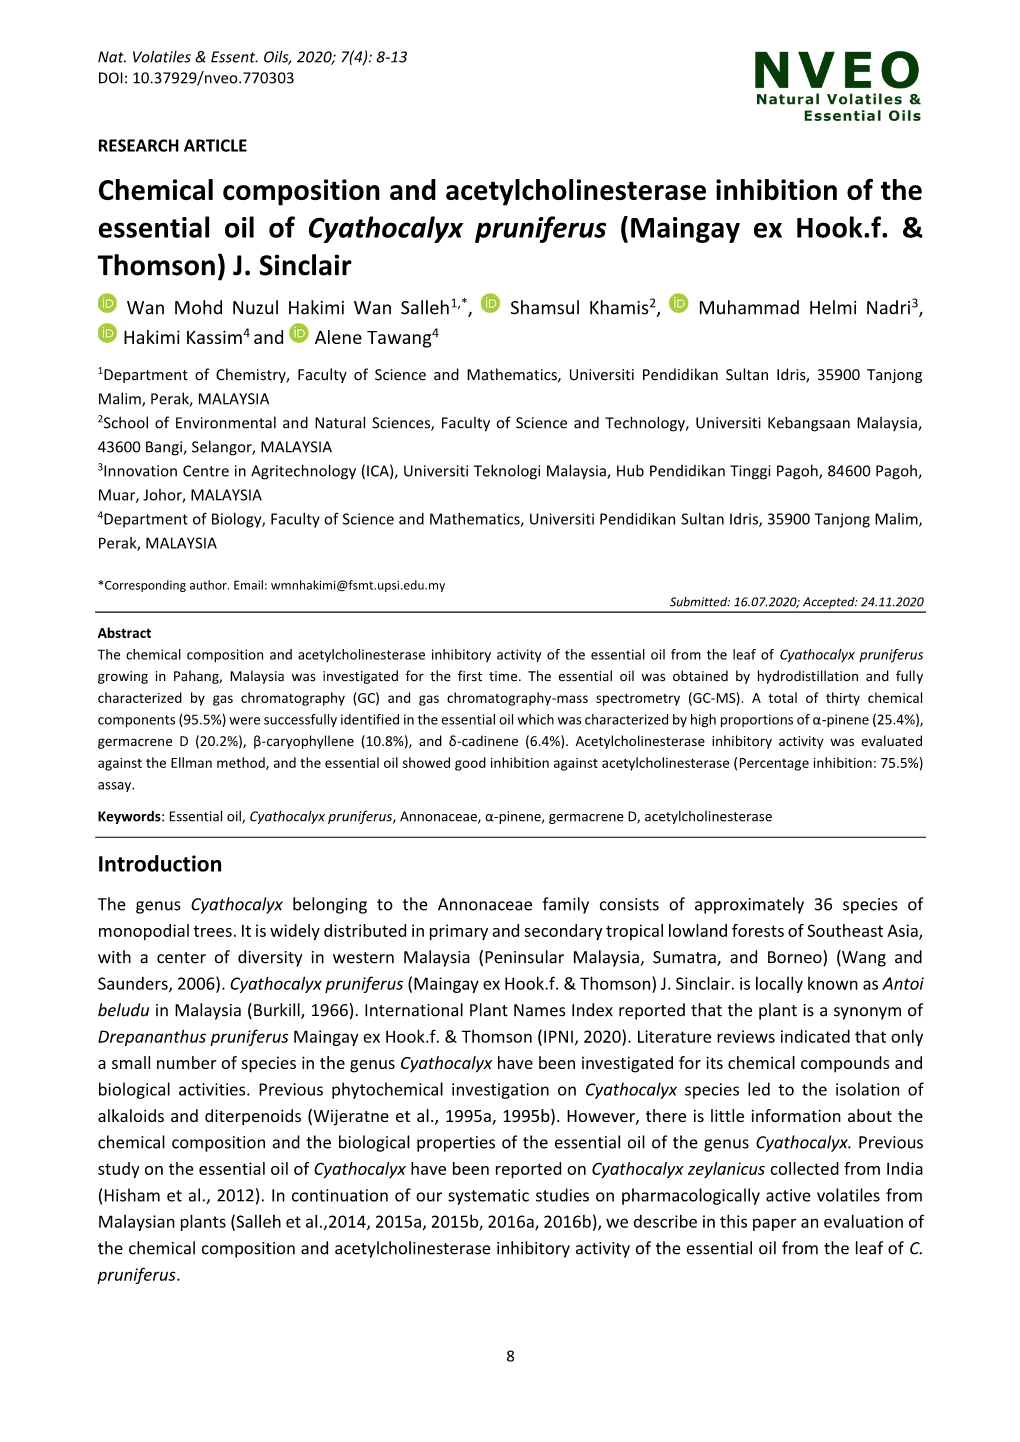 Chemical Composition and Acetylcholinesterase Inhibition of the Essential Oil of Cyathocalyx Pruniferus (Maingay Ex Hook.F